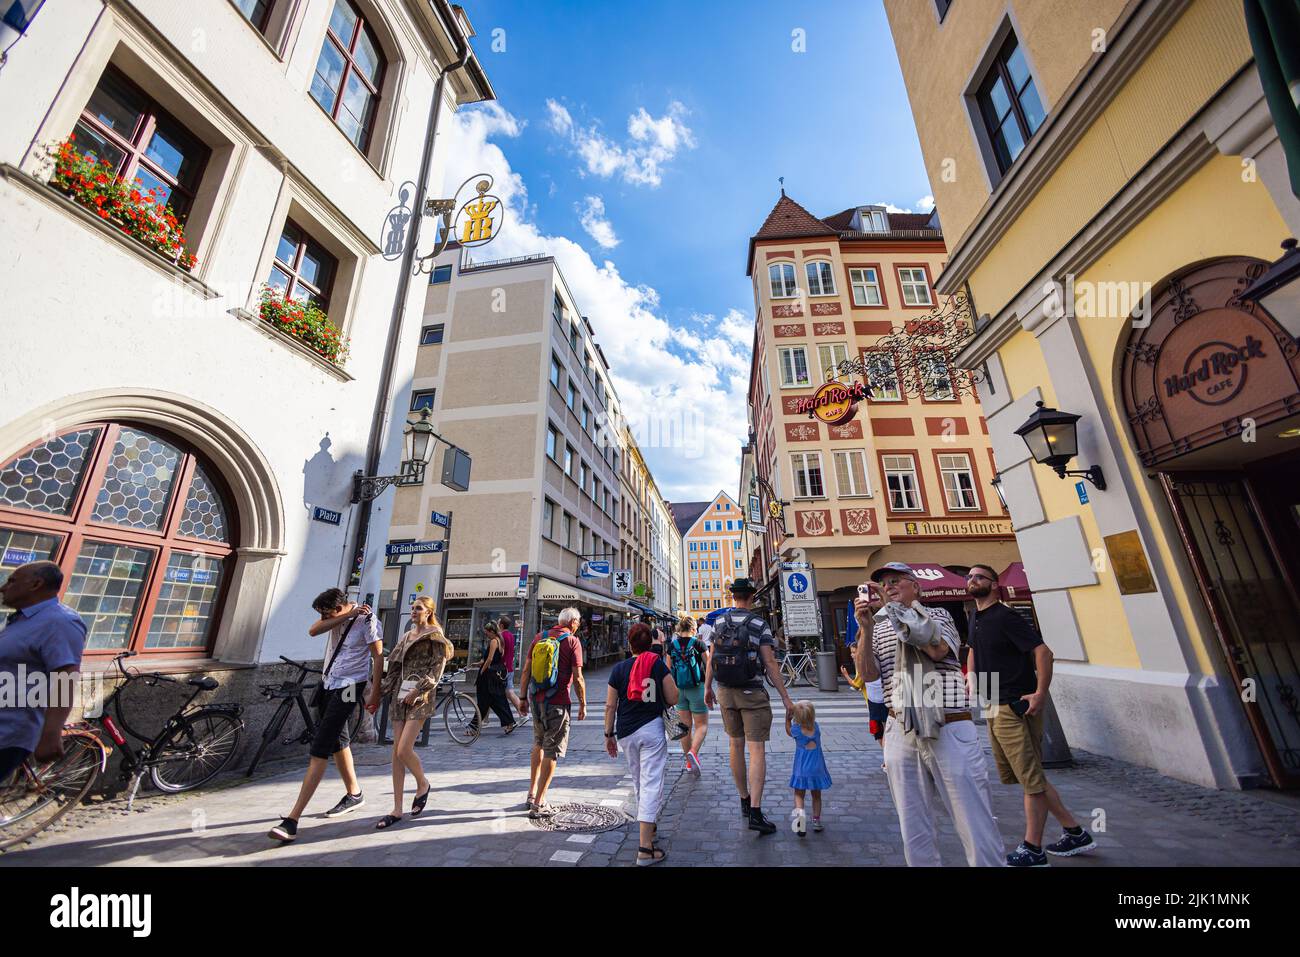 Munich, Germany - July 6, 2022: Street view to the Platzl, alley between Hofbräuhaus and Hard Rock Cafe. Tourists take photos of the famous Beer Hall. Stock Photo